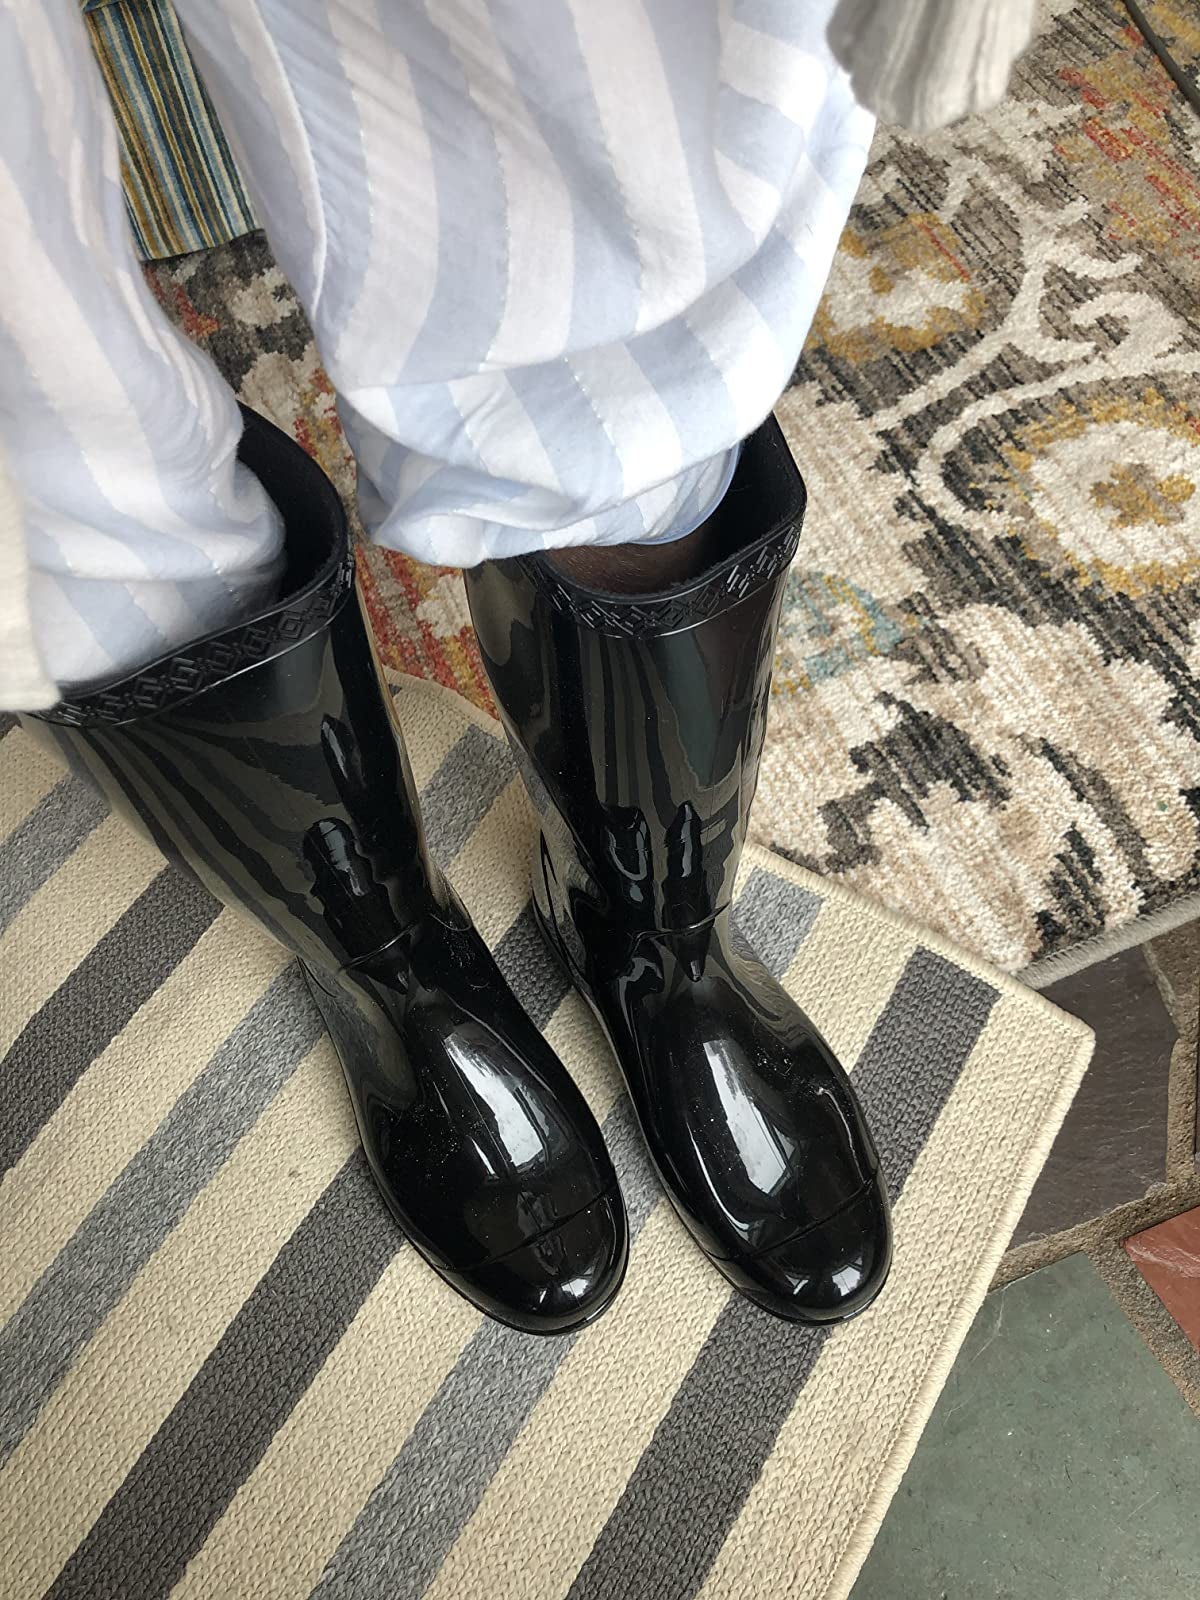 25 Rain Boots That Are Stylish and Practical